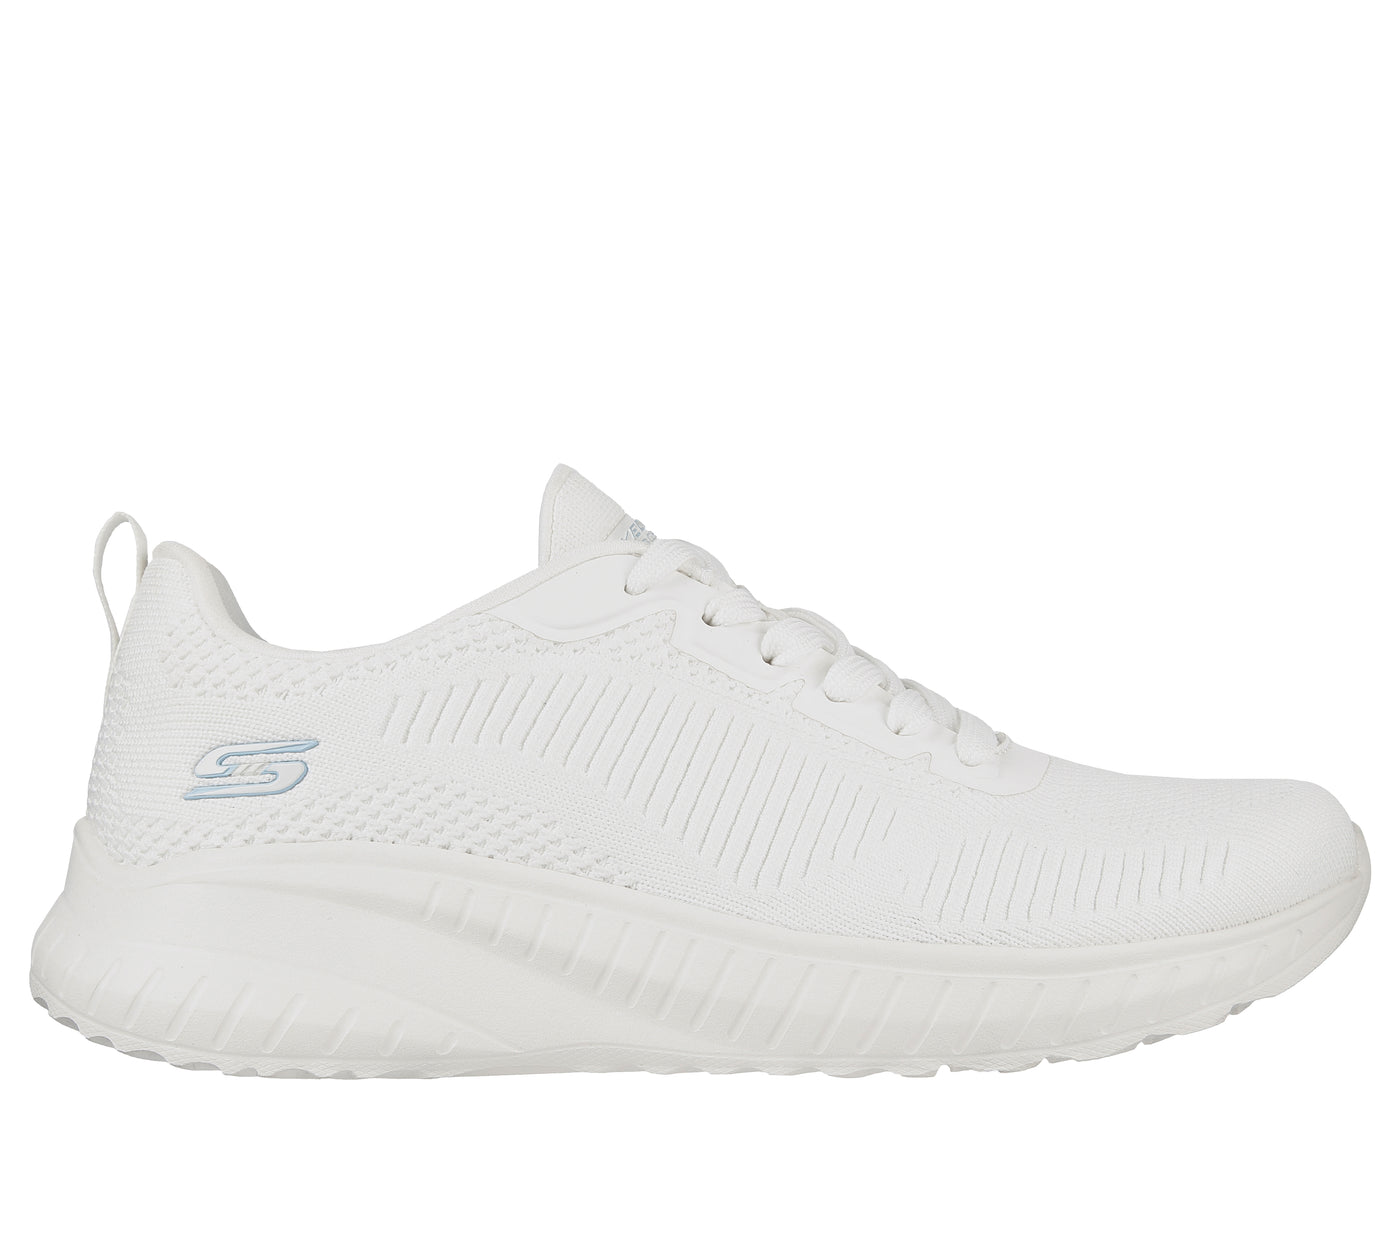 Skechers Face Off BOBS off white Shoes Life and Sole 